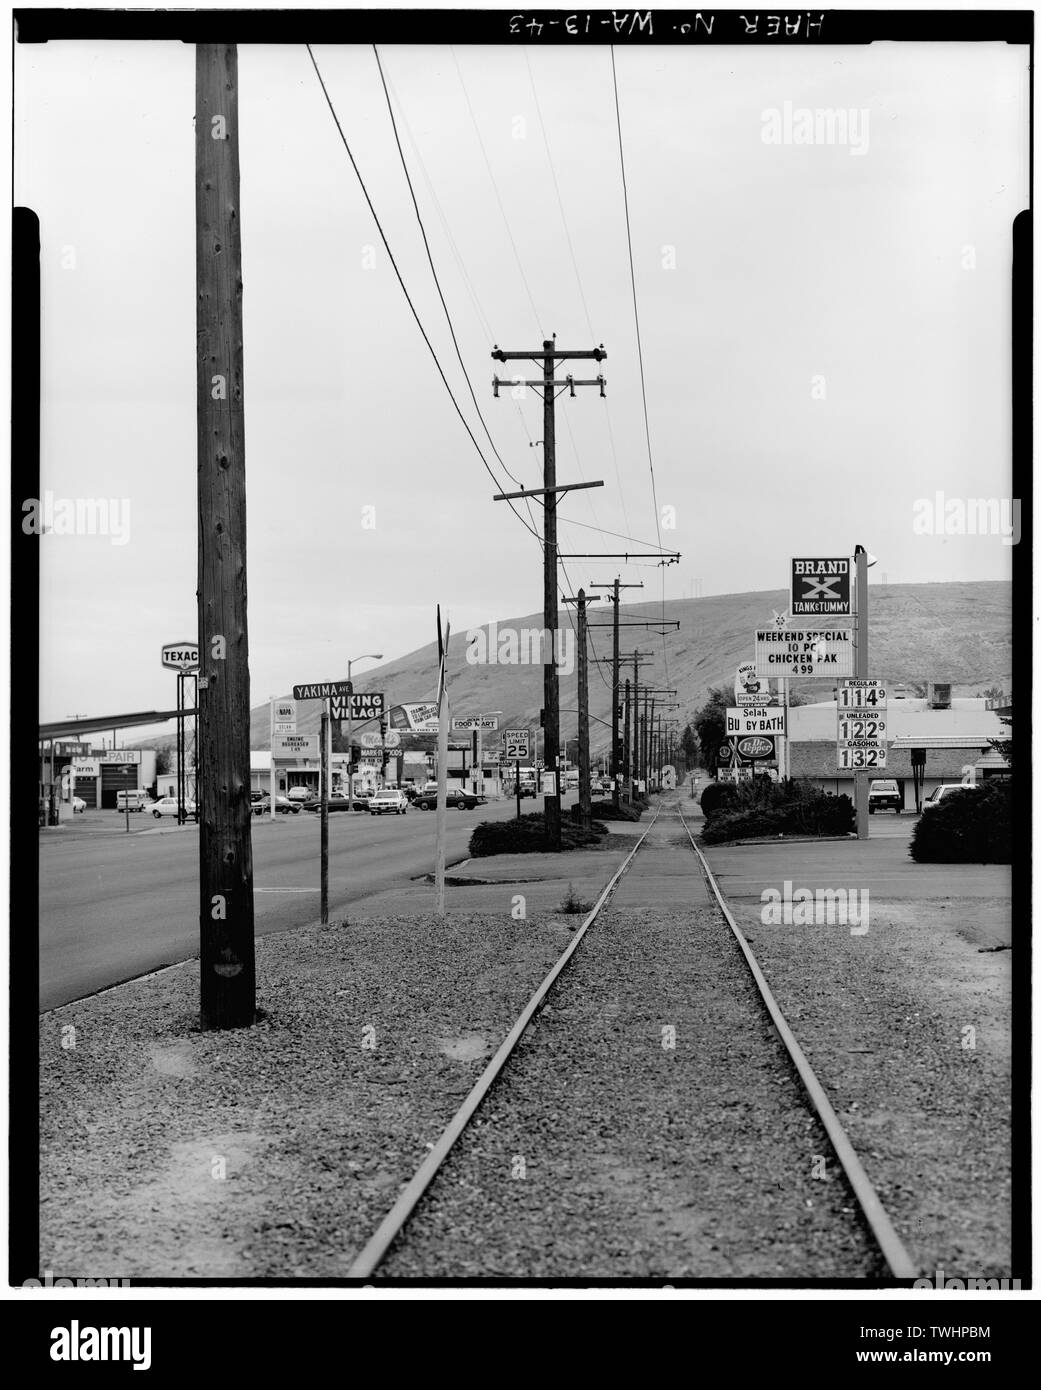 SELAH LINE, LOOKING SOUTH ALONG FIRST STREET IN SELAH FROM YAKIMA AVENUE - Yakima Valley Transportation Company Interurban Railroad, Connecting towns of Yakima, Selah and Wiley City, Yakima, Yakima County, WA; Kenly, Edward M; Whitson, Edward; Sawyer, William P; Scudder, Henry B; Yakima Inter-Valley Traction Company; Splawn, A J; Rankin, George S; Niles Car Company; Yearby, Jean P, transmitter; Johnsen, Kenneth G, historian; Schmidt, Jigger, photographer Stock Photo